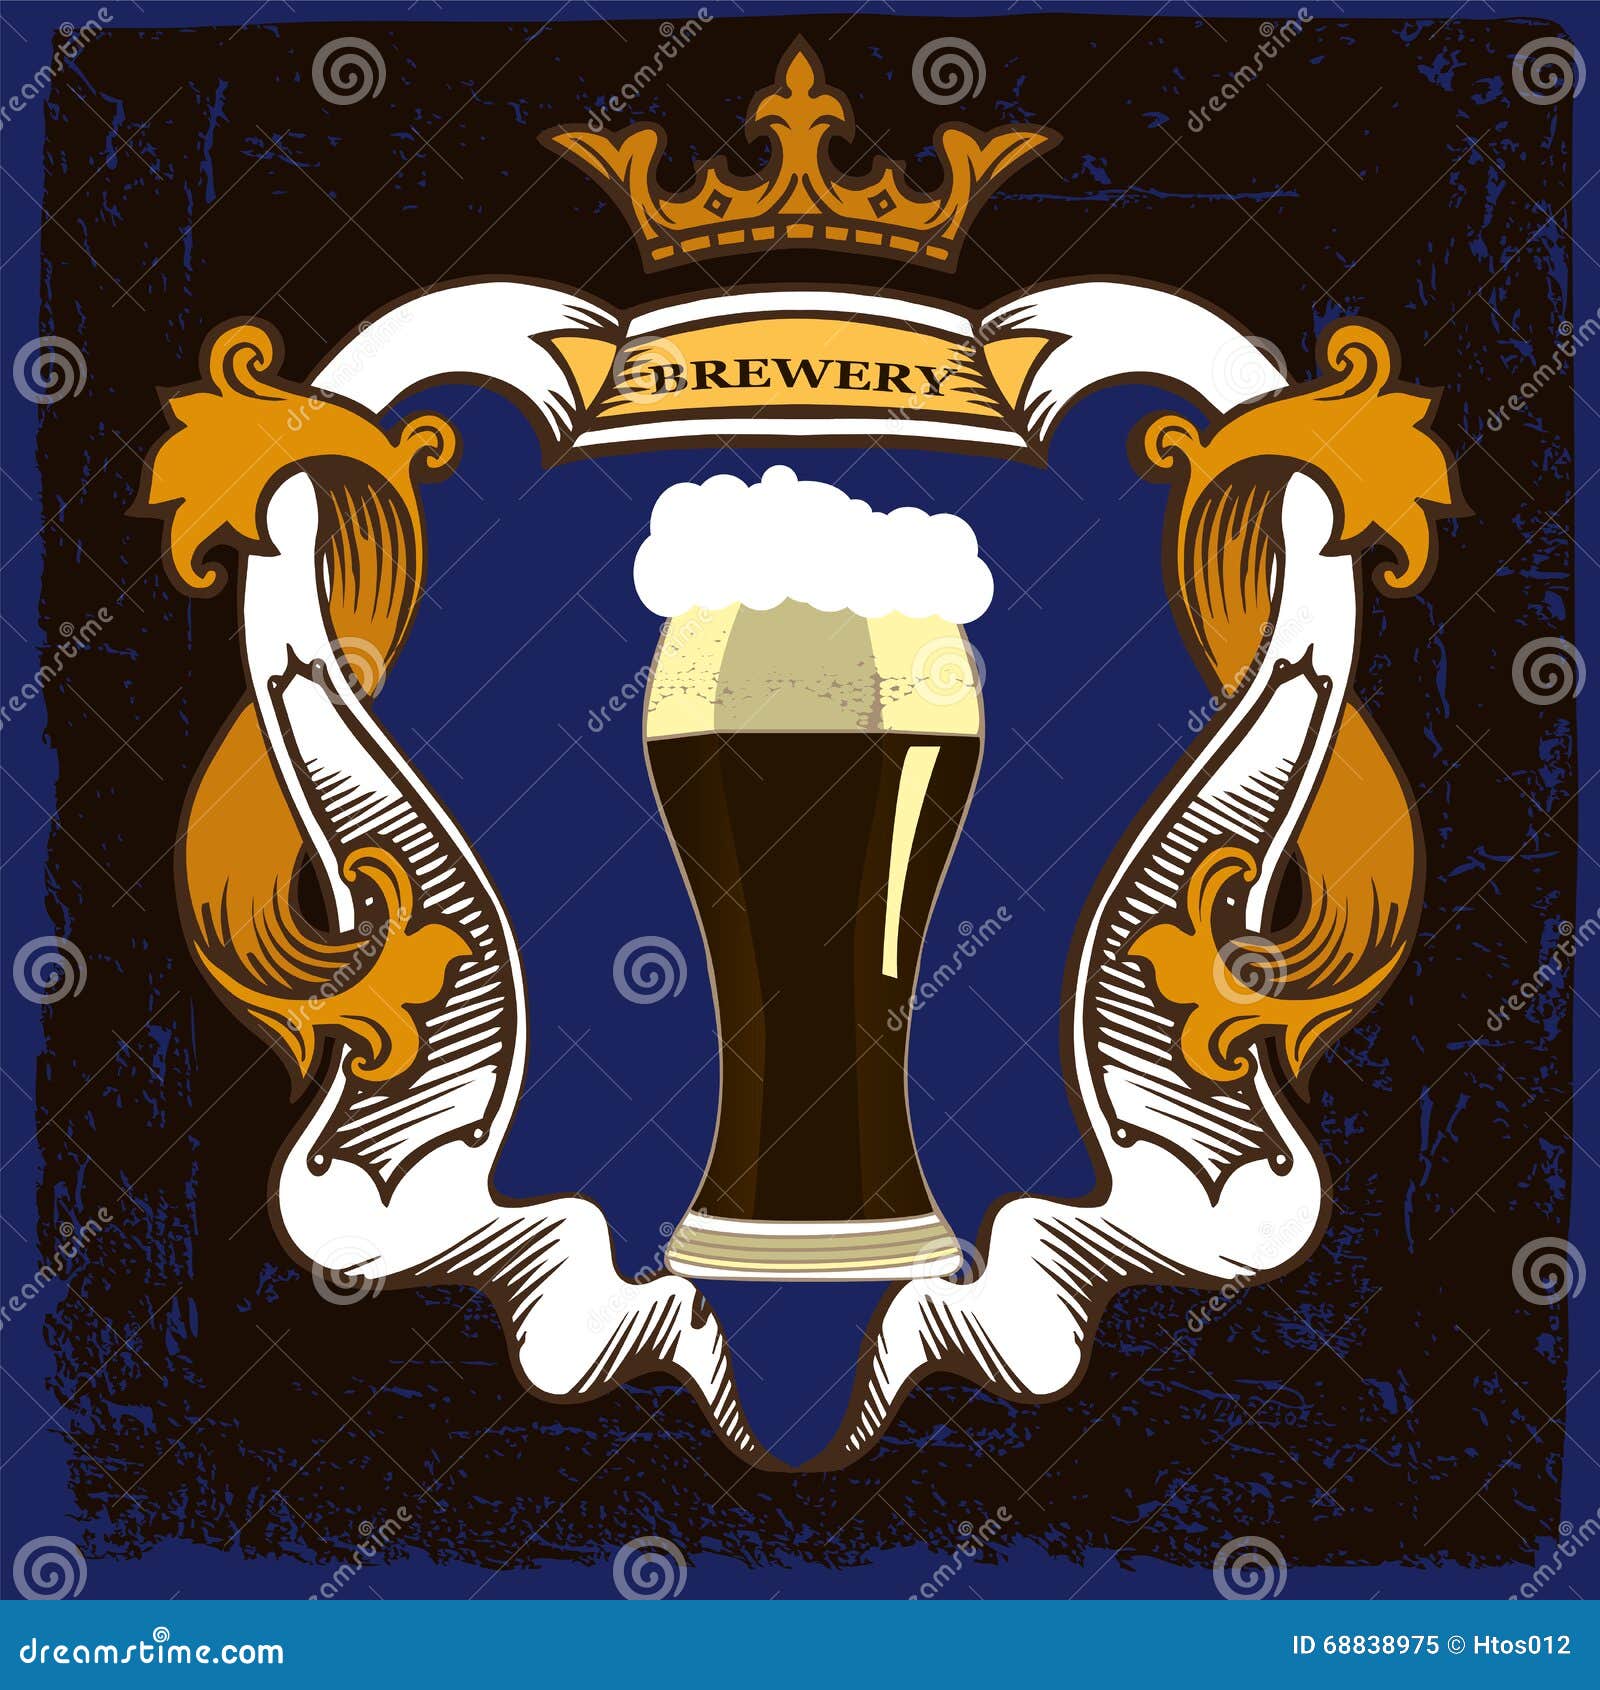 beer label for brasserie restaurant with beer mug and crown